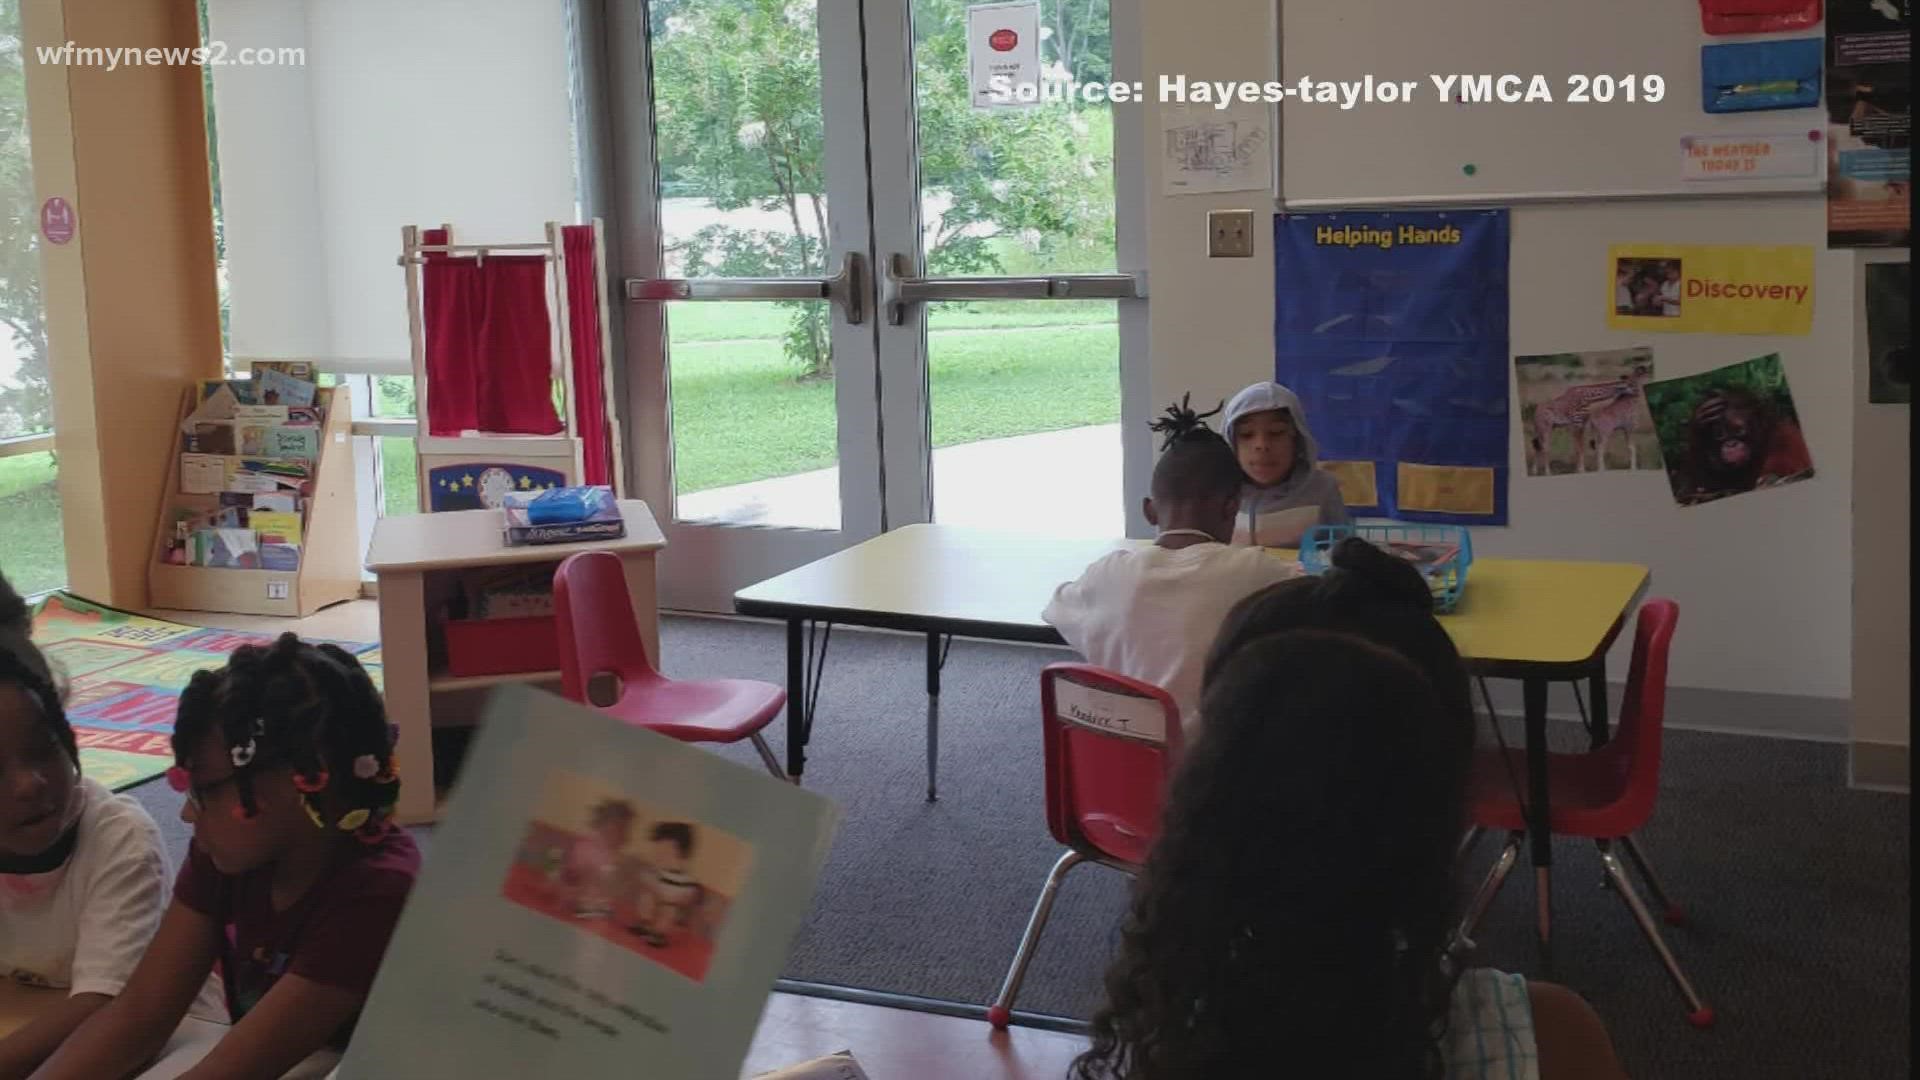 Hayes-Taylor YMCA is putting more emphasis on social and emotional development because of the impact of the pandemic.